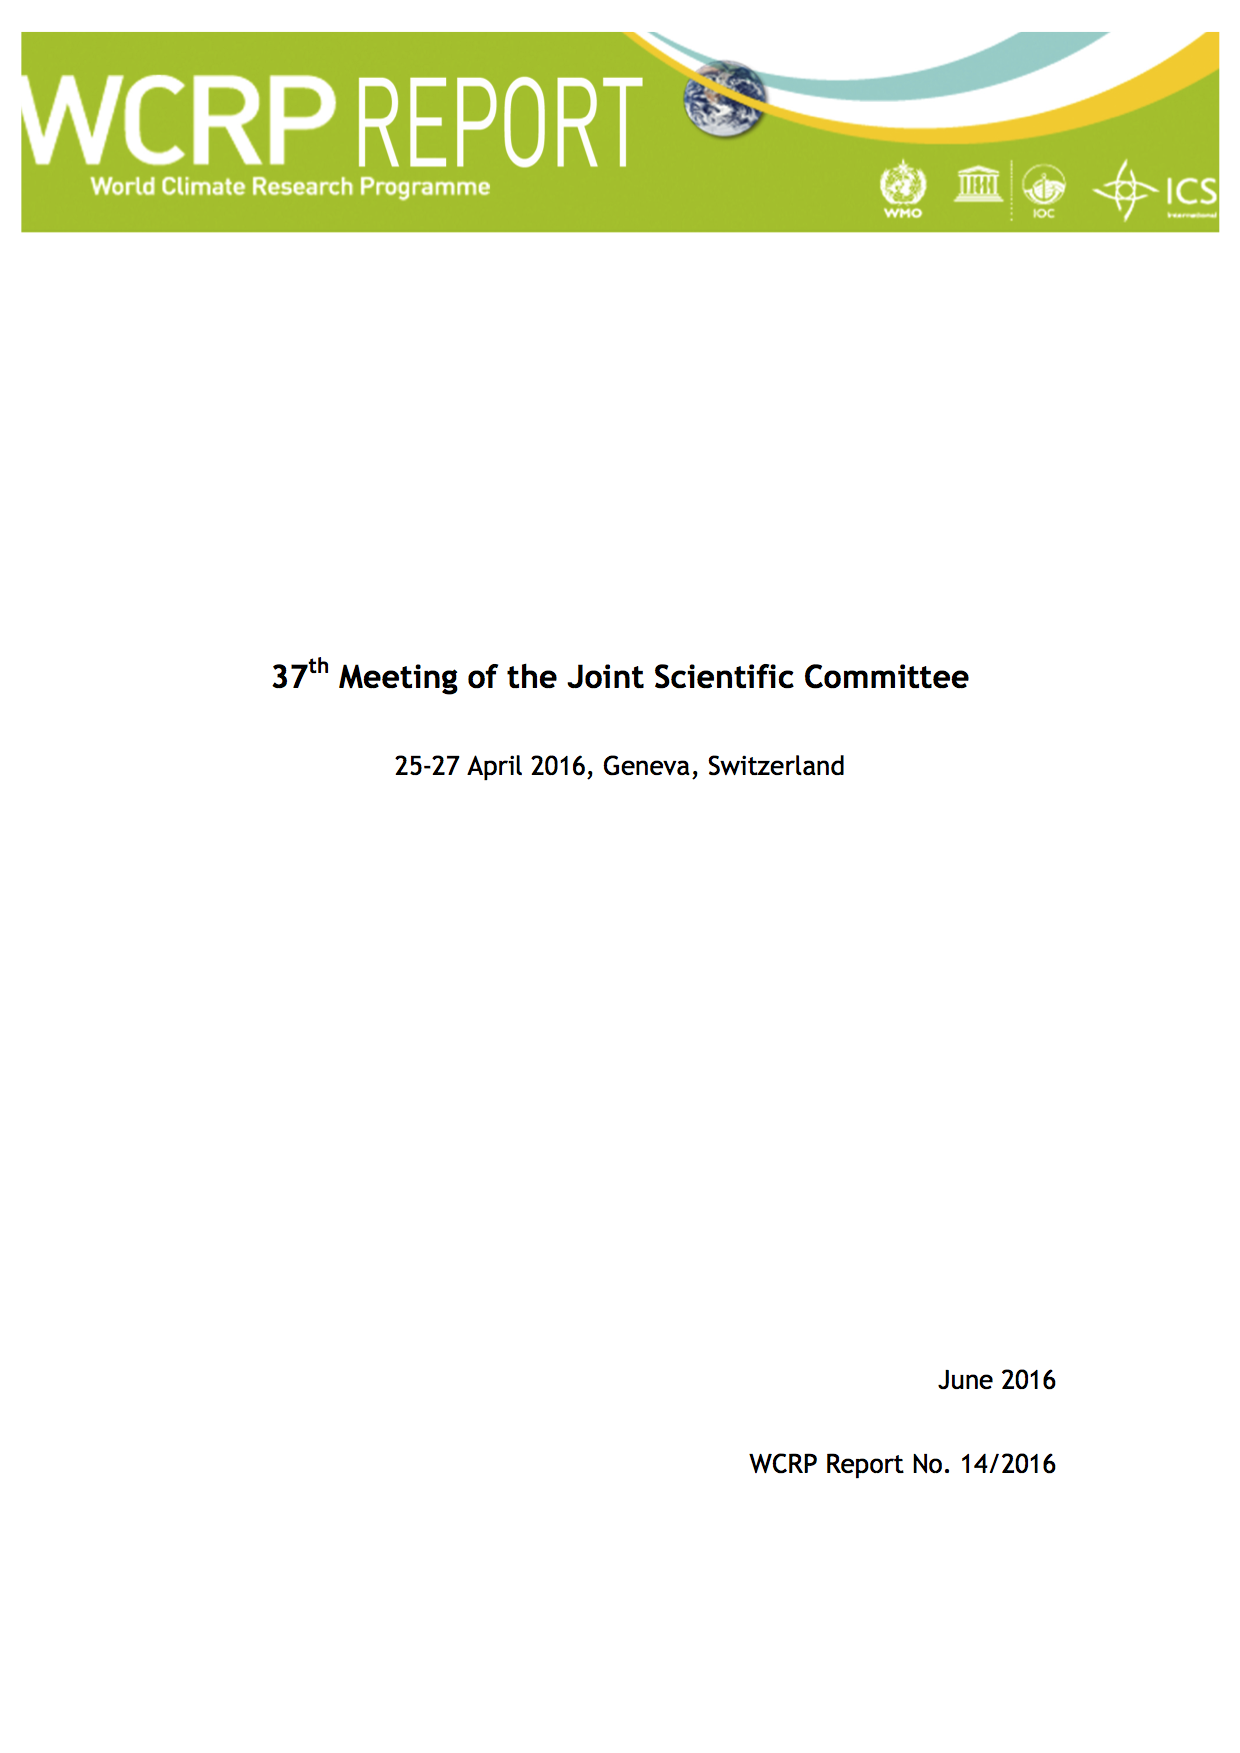 37th Session of the Joint Scientific Committee